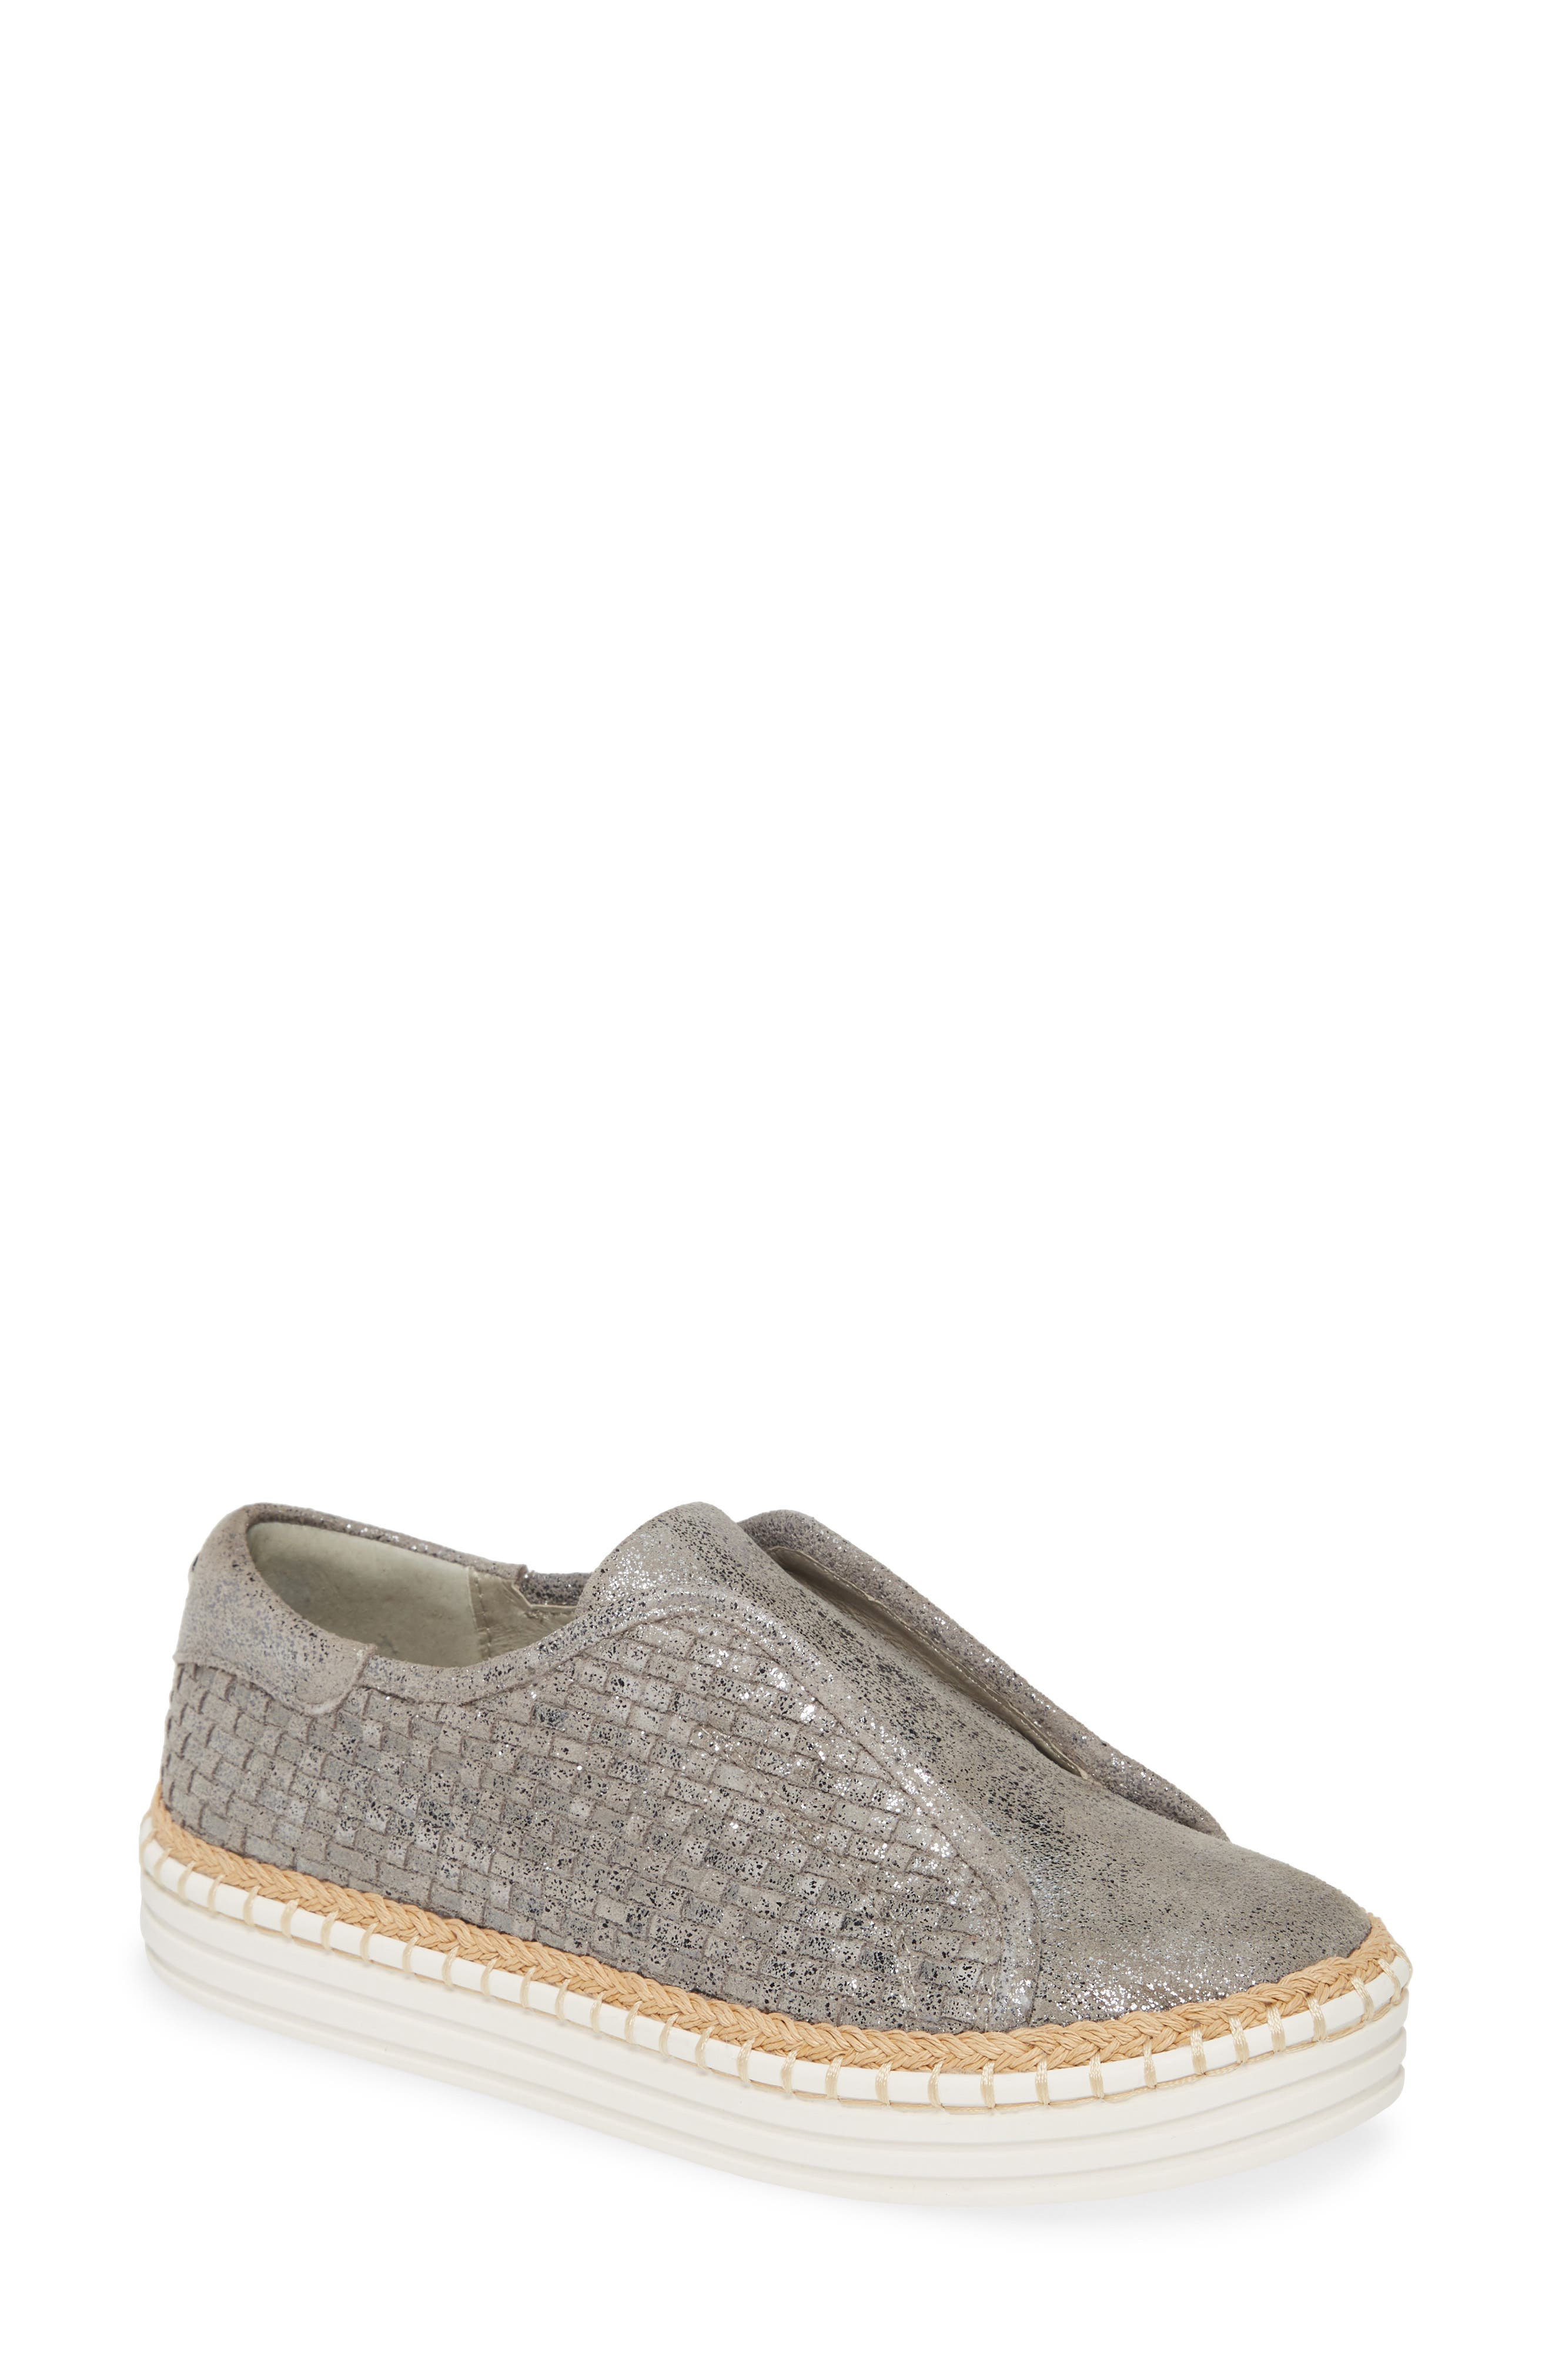 Sneaker In Pewter Kiss Leather | ModeSens